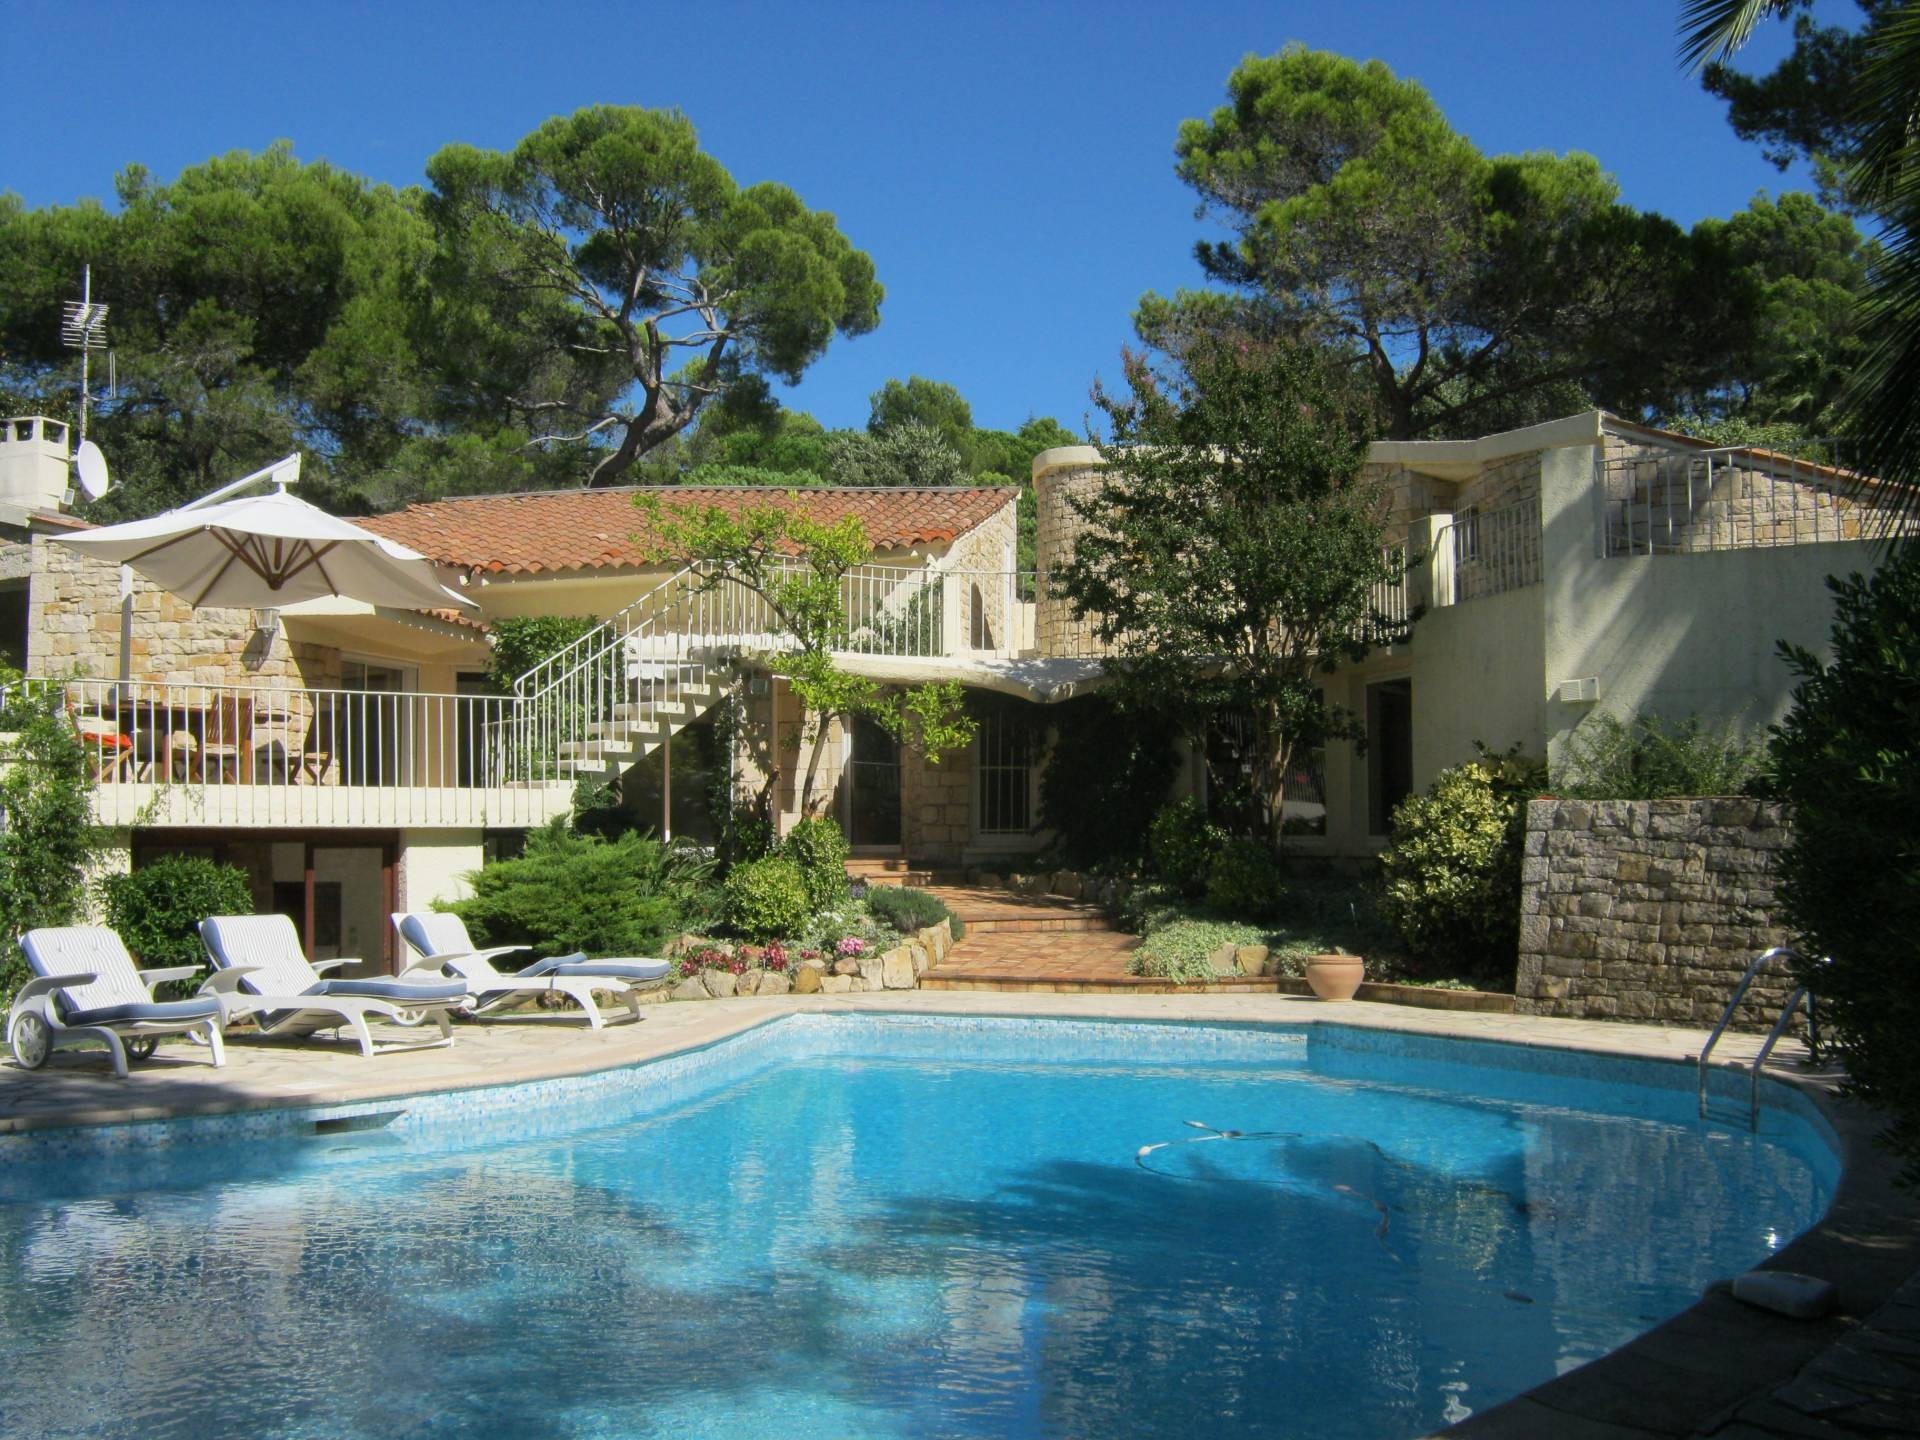 Luxury Bungalow in Mougins with Swimmingpool HD Wallpapers